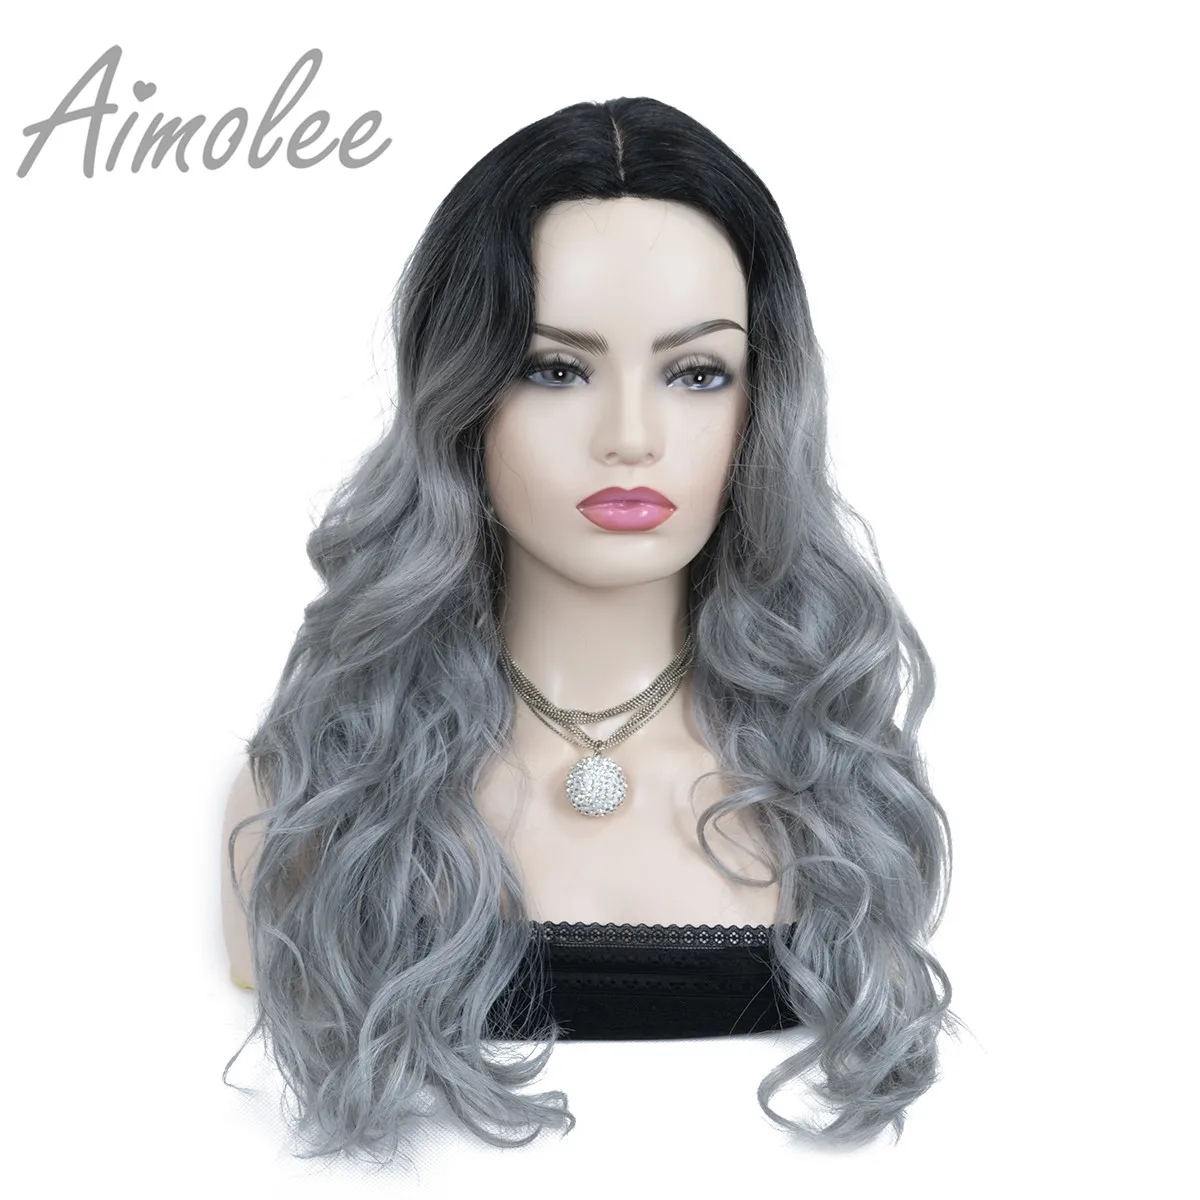 Aimolee Women's Ombre Wigs Hair grey blue Color Synthetic Natural Long Curly  Part lace Wig Wigs for women